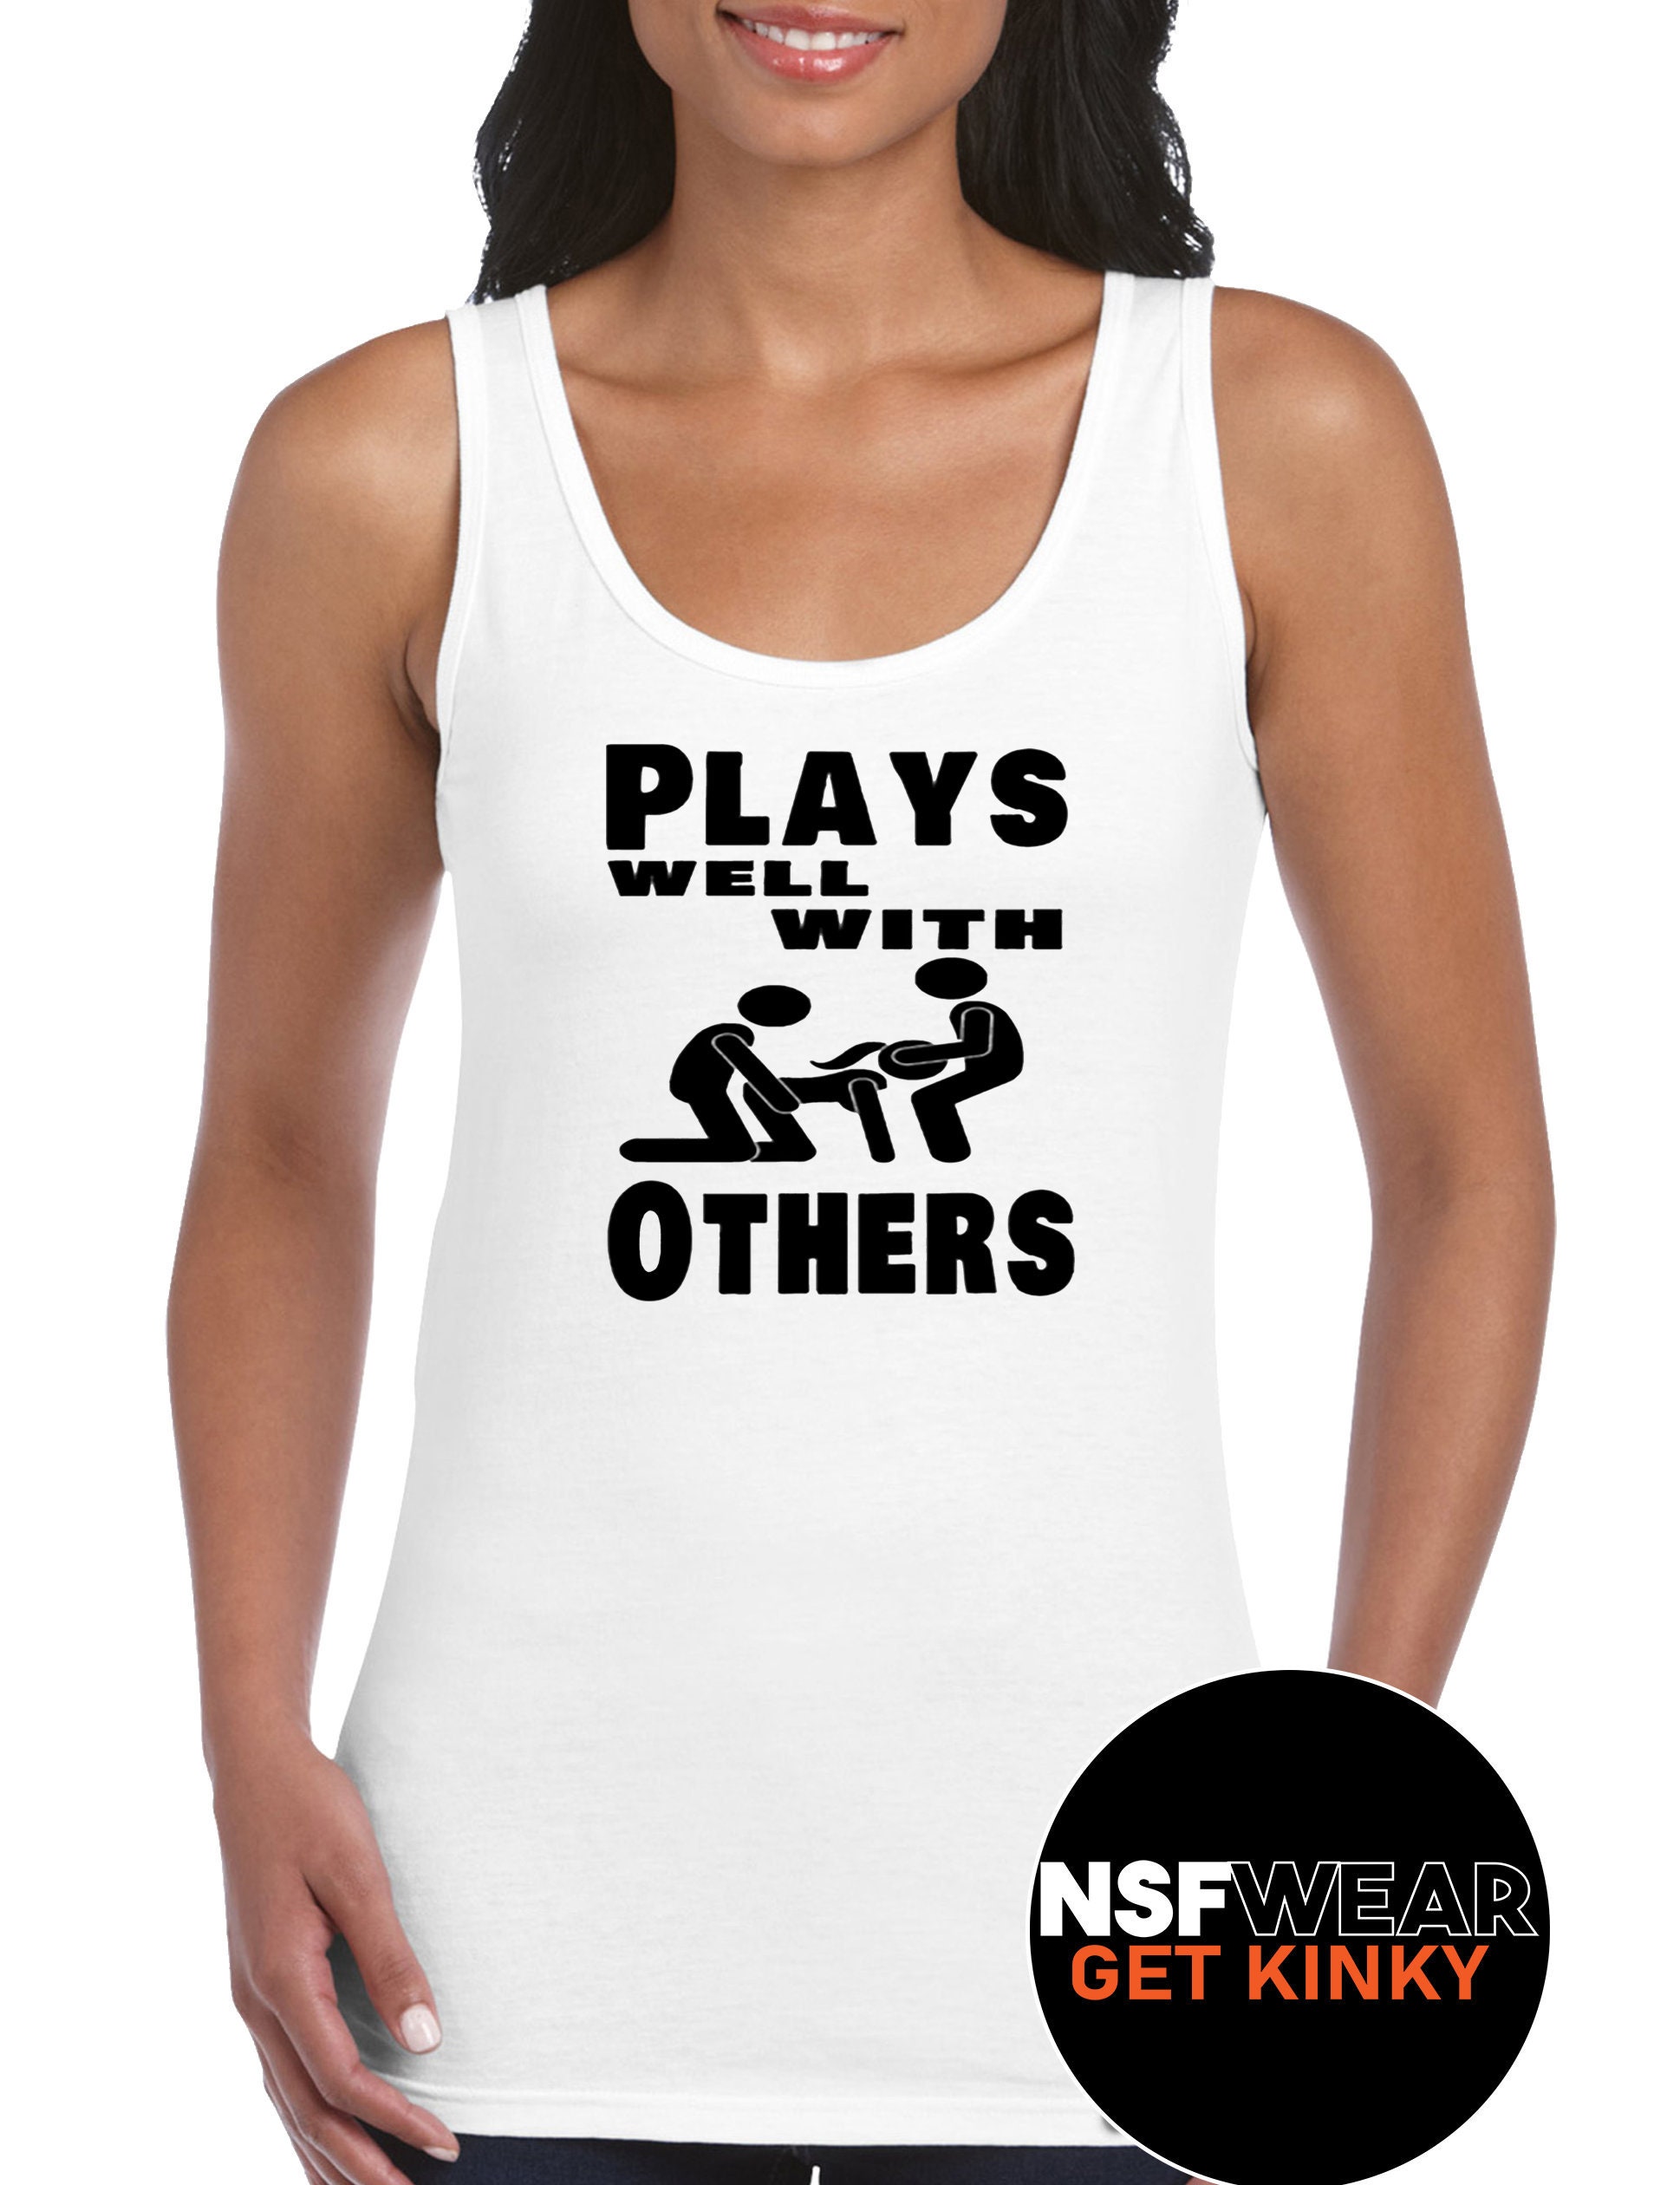 Plays Well With Others Tank T-shirt Cami or Apron Hotwife photo